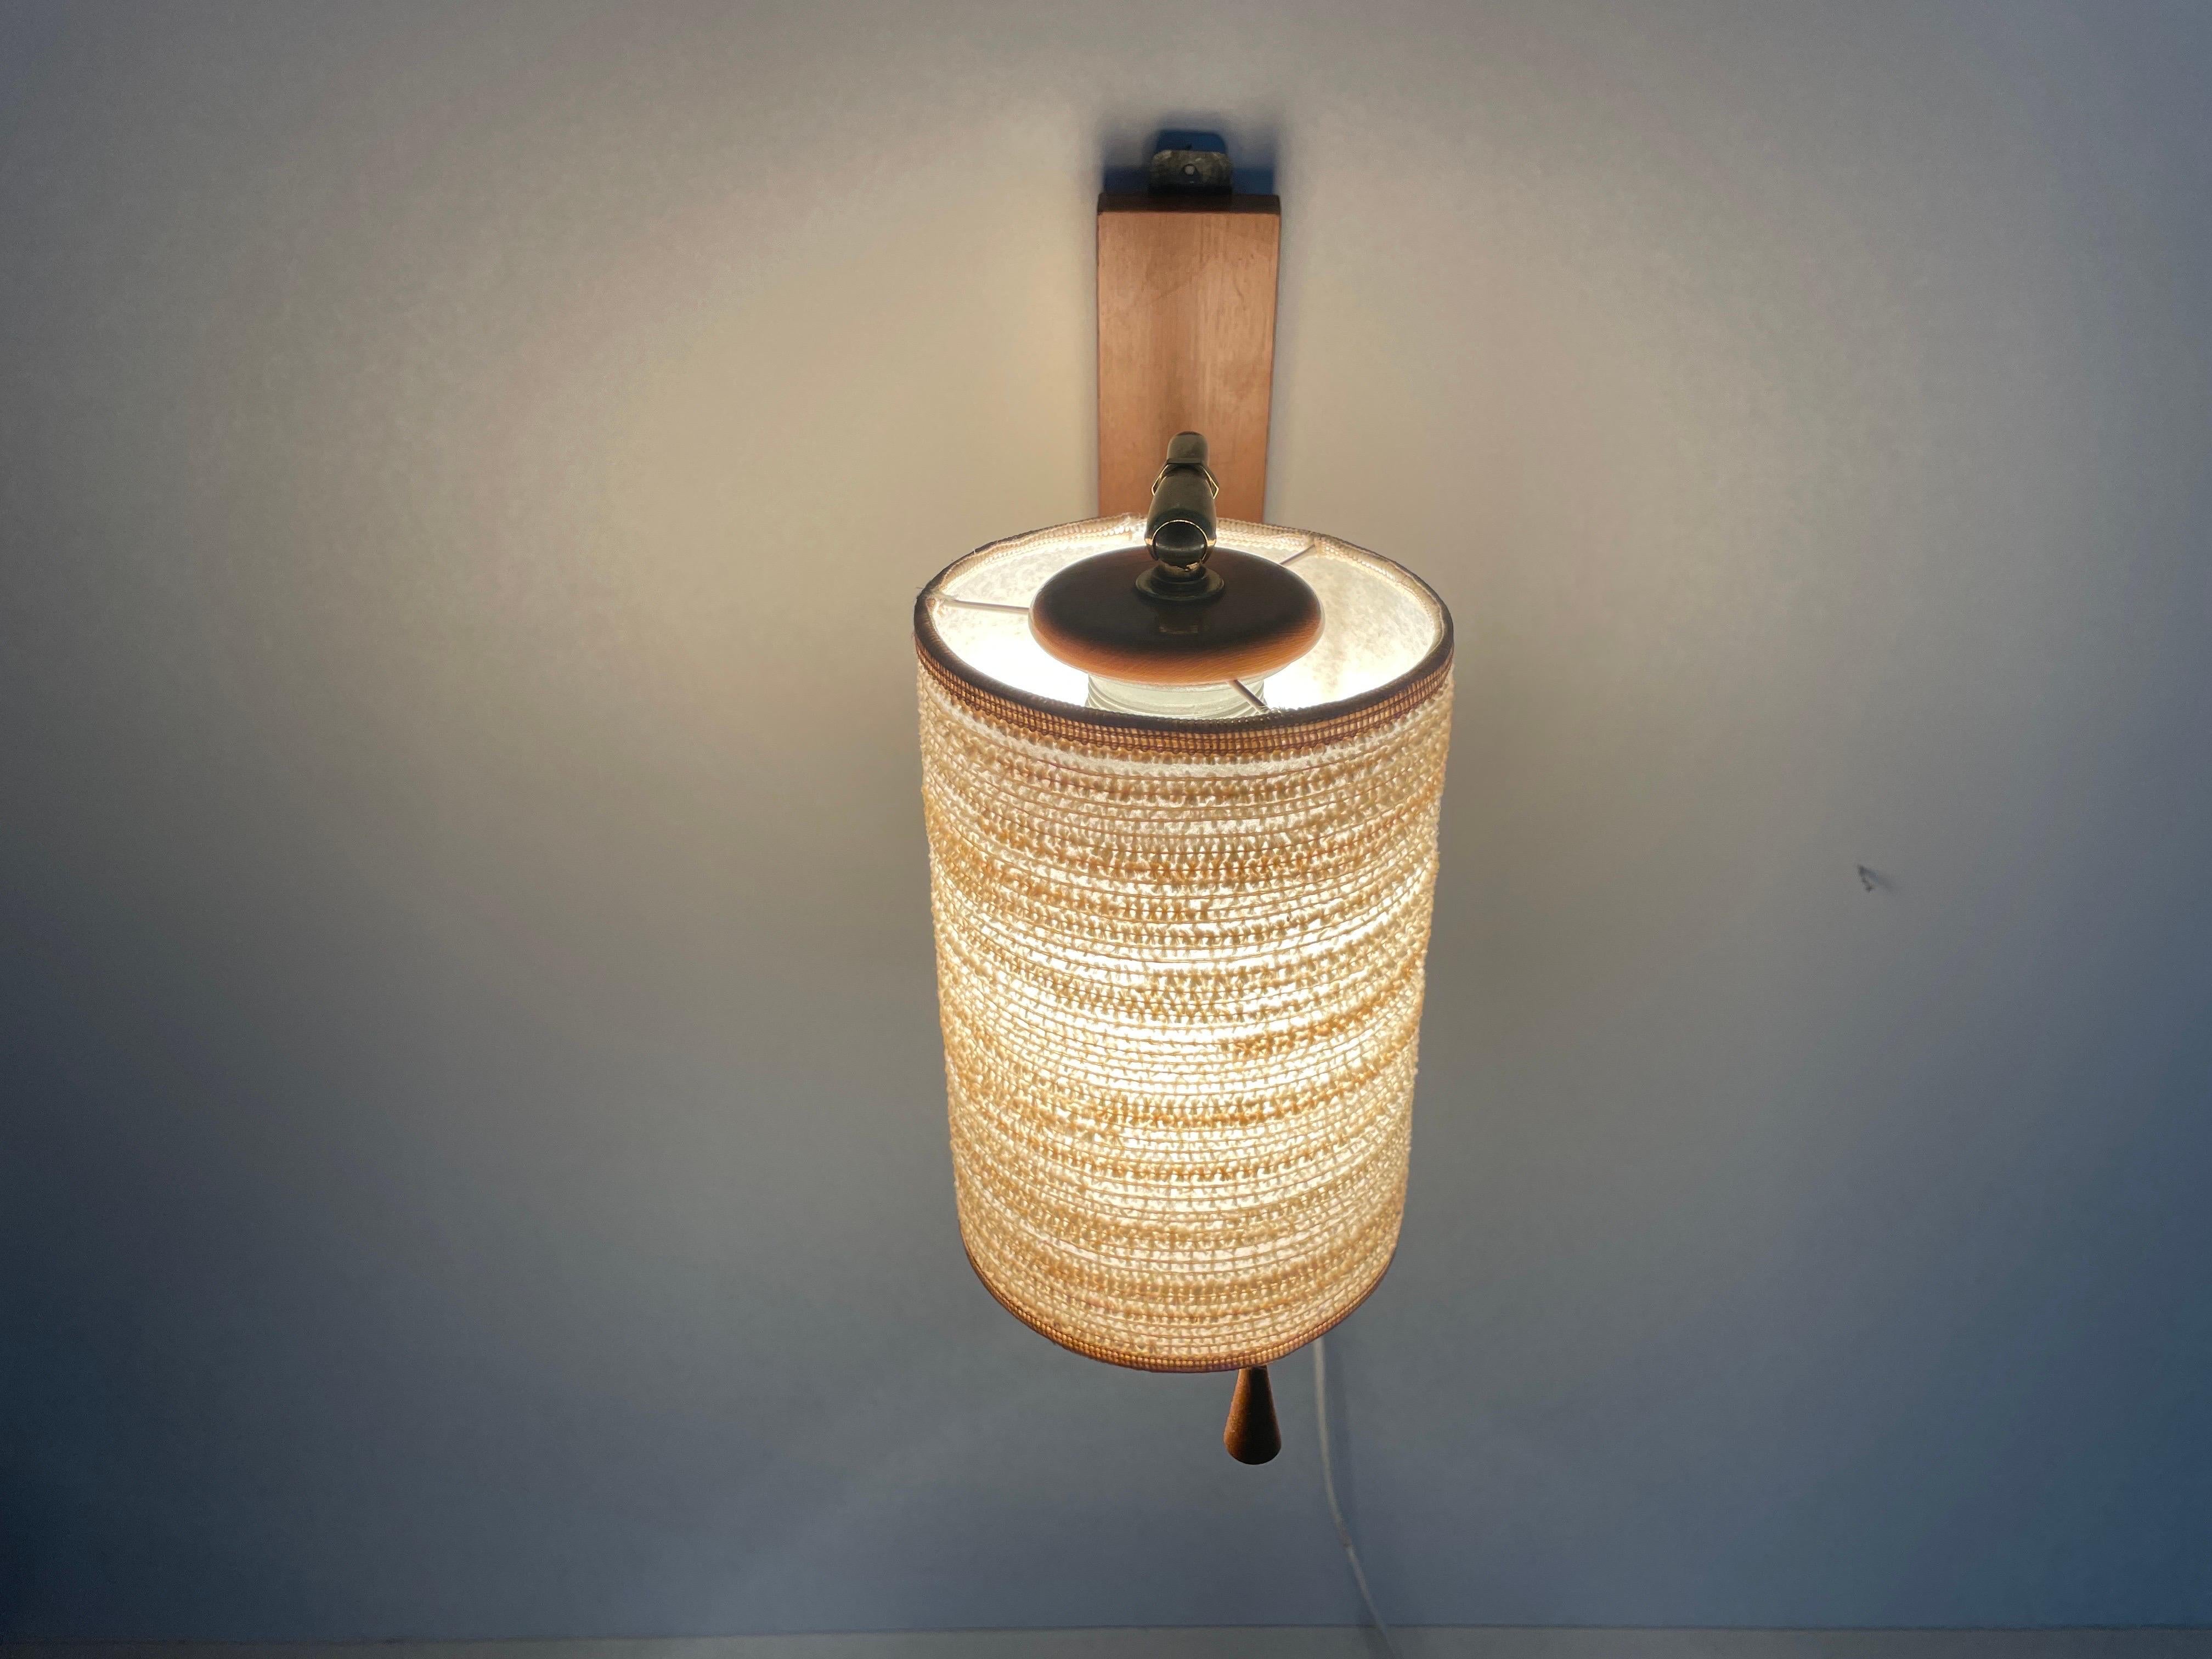 Fabric Shade and Wood Wall Lamp with Brass Neck, 1960s, Germany For Sale 8